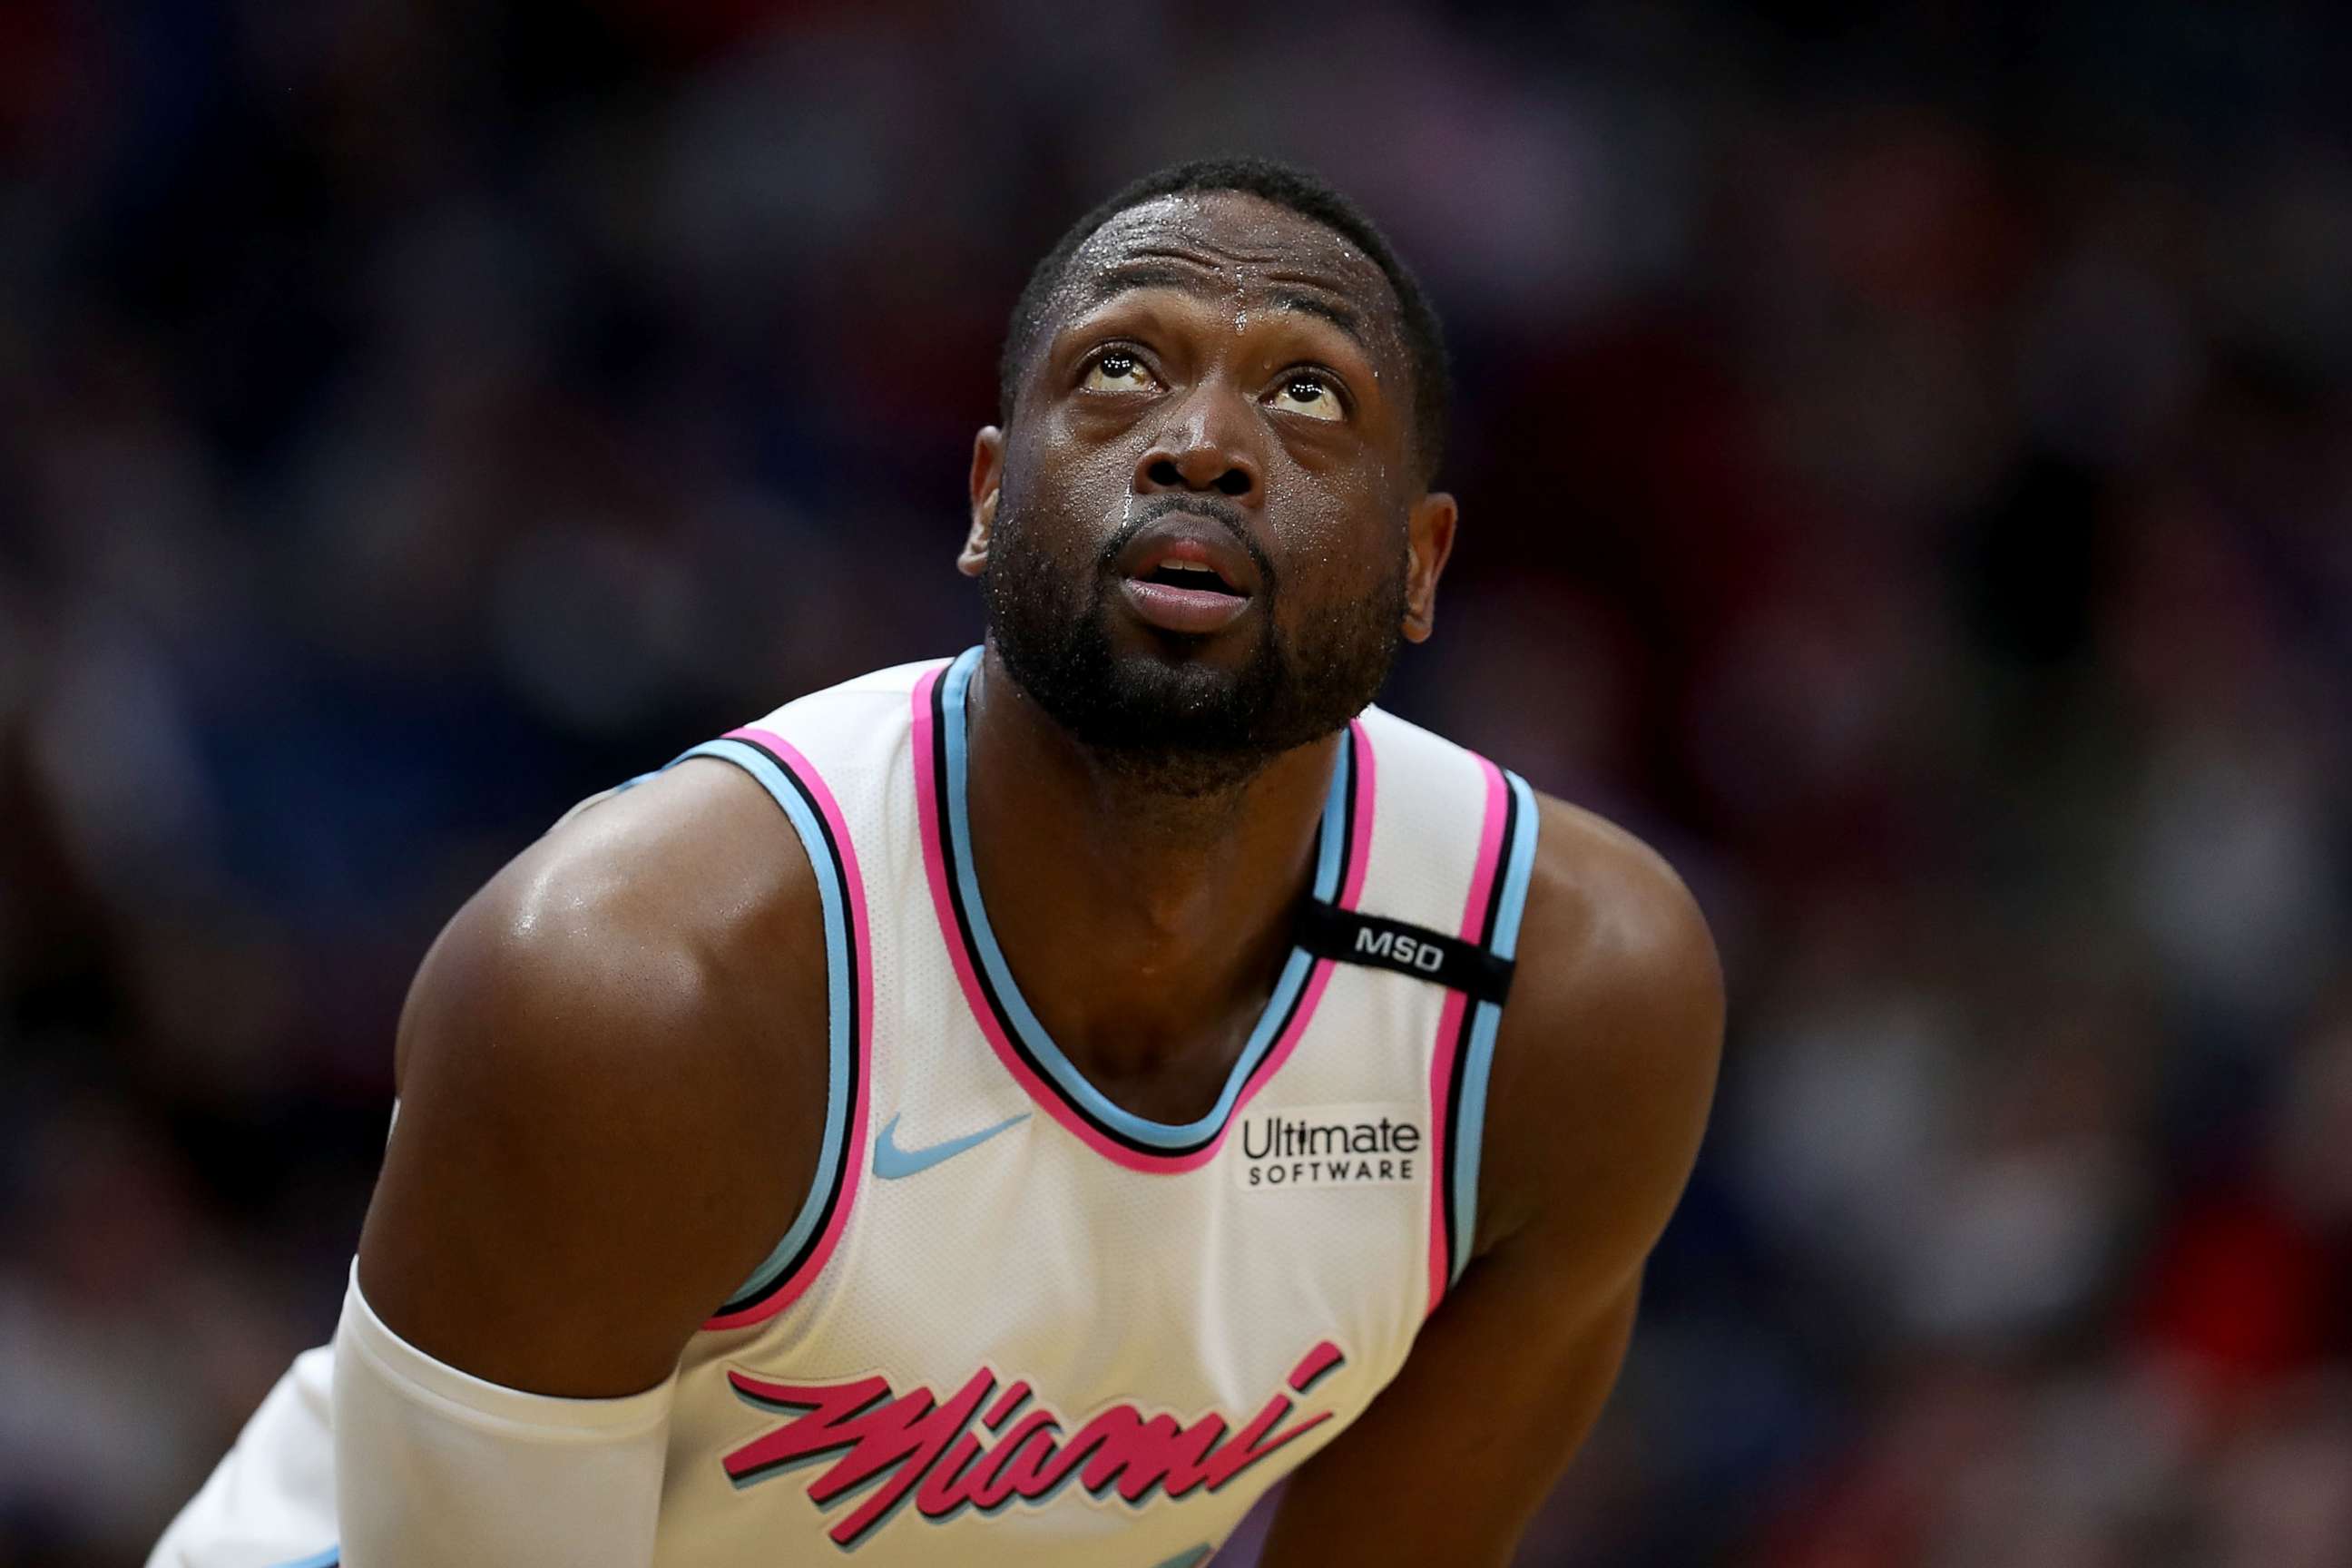 PHOTO: Dwyane Wade of the Miami Heat during a game against the New Orleans Pelicans at the Smoothie King Center, Feb. 23, 2018, in New Orleans.